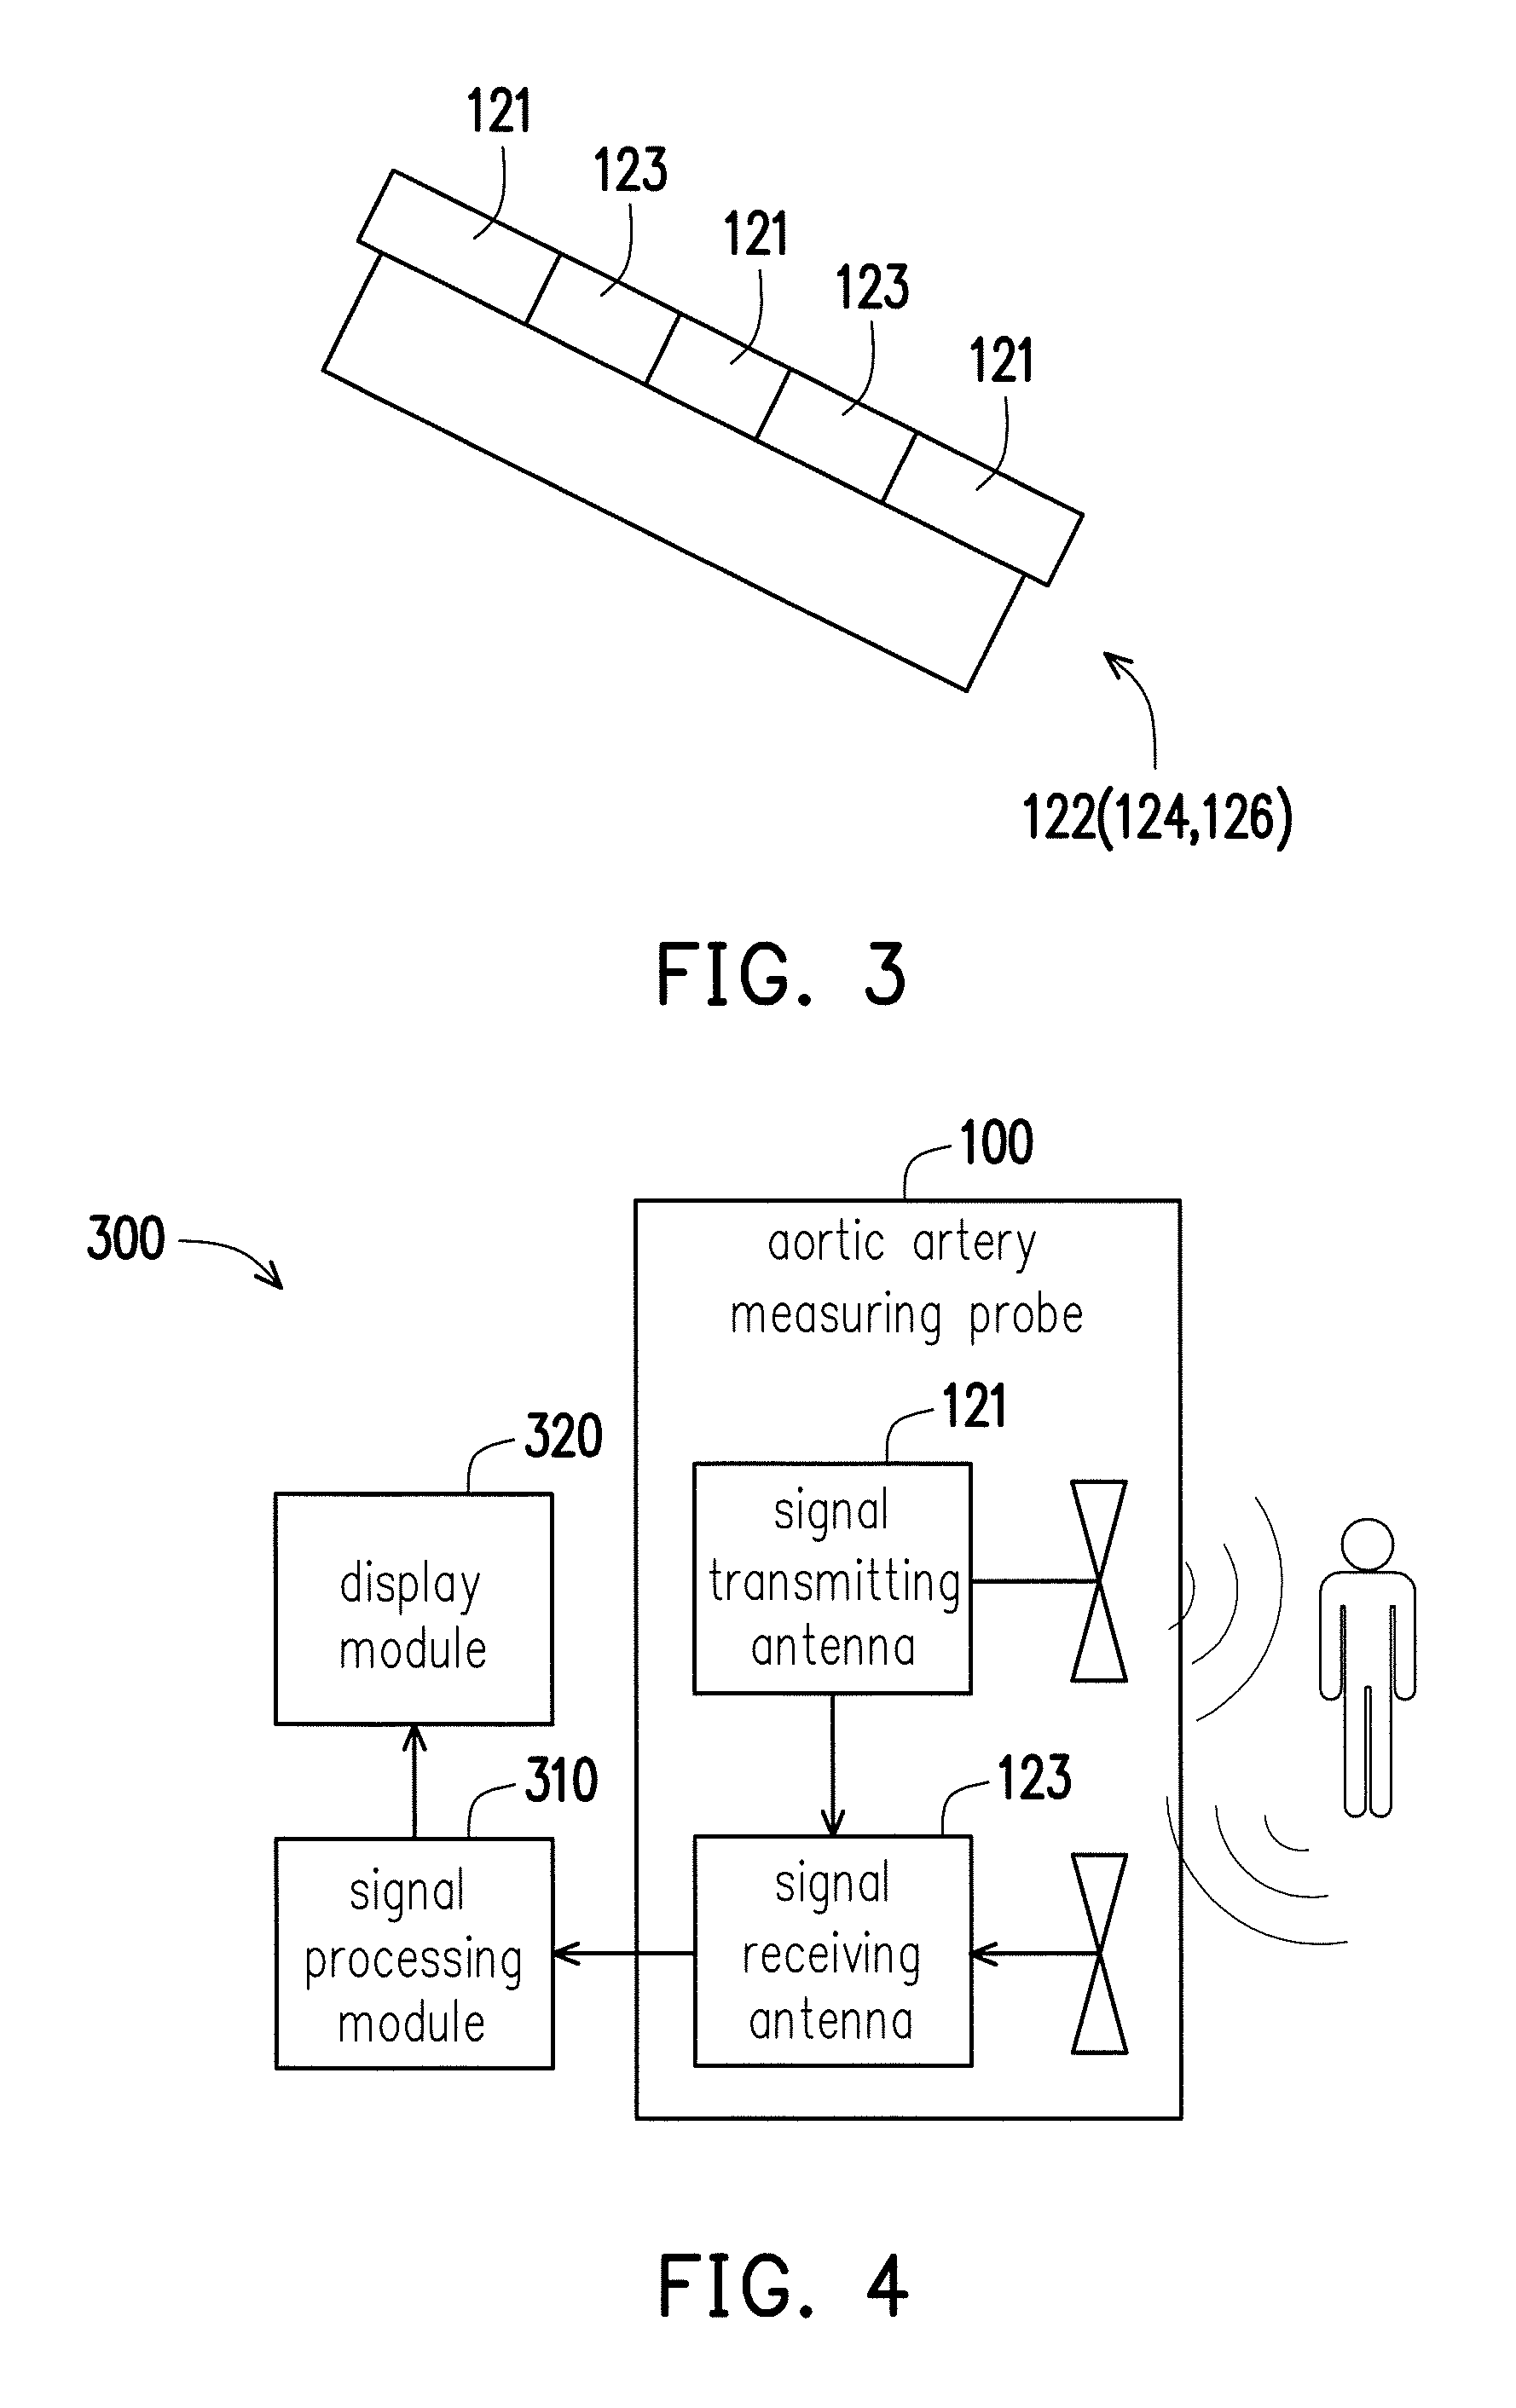 Aortic artery measuring probe, device and method of measuring diameter of aortic artery